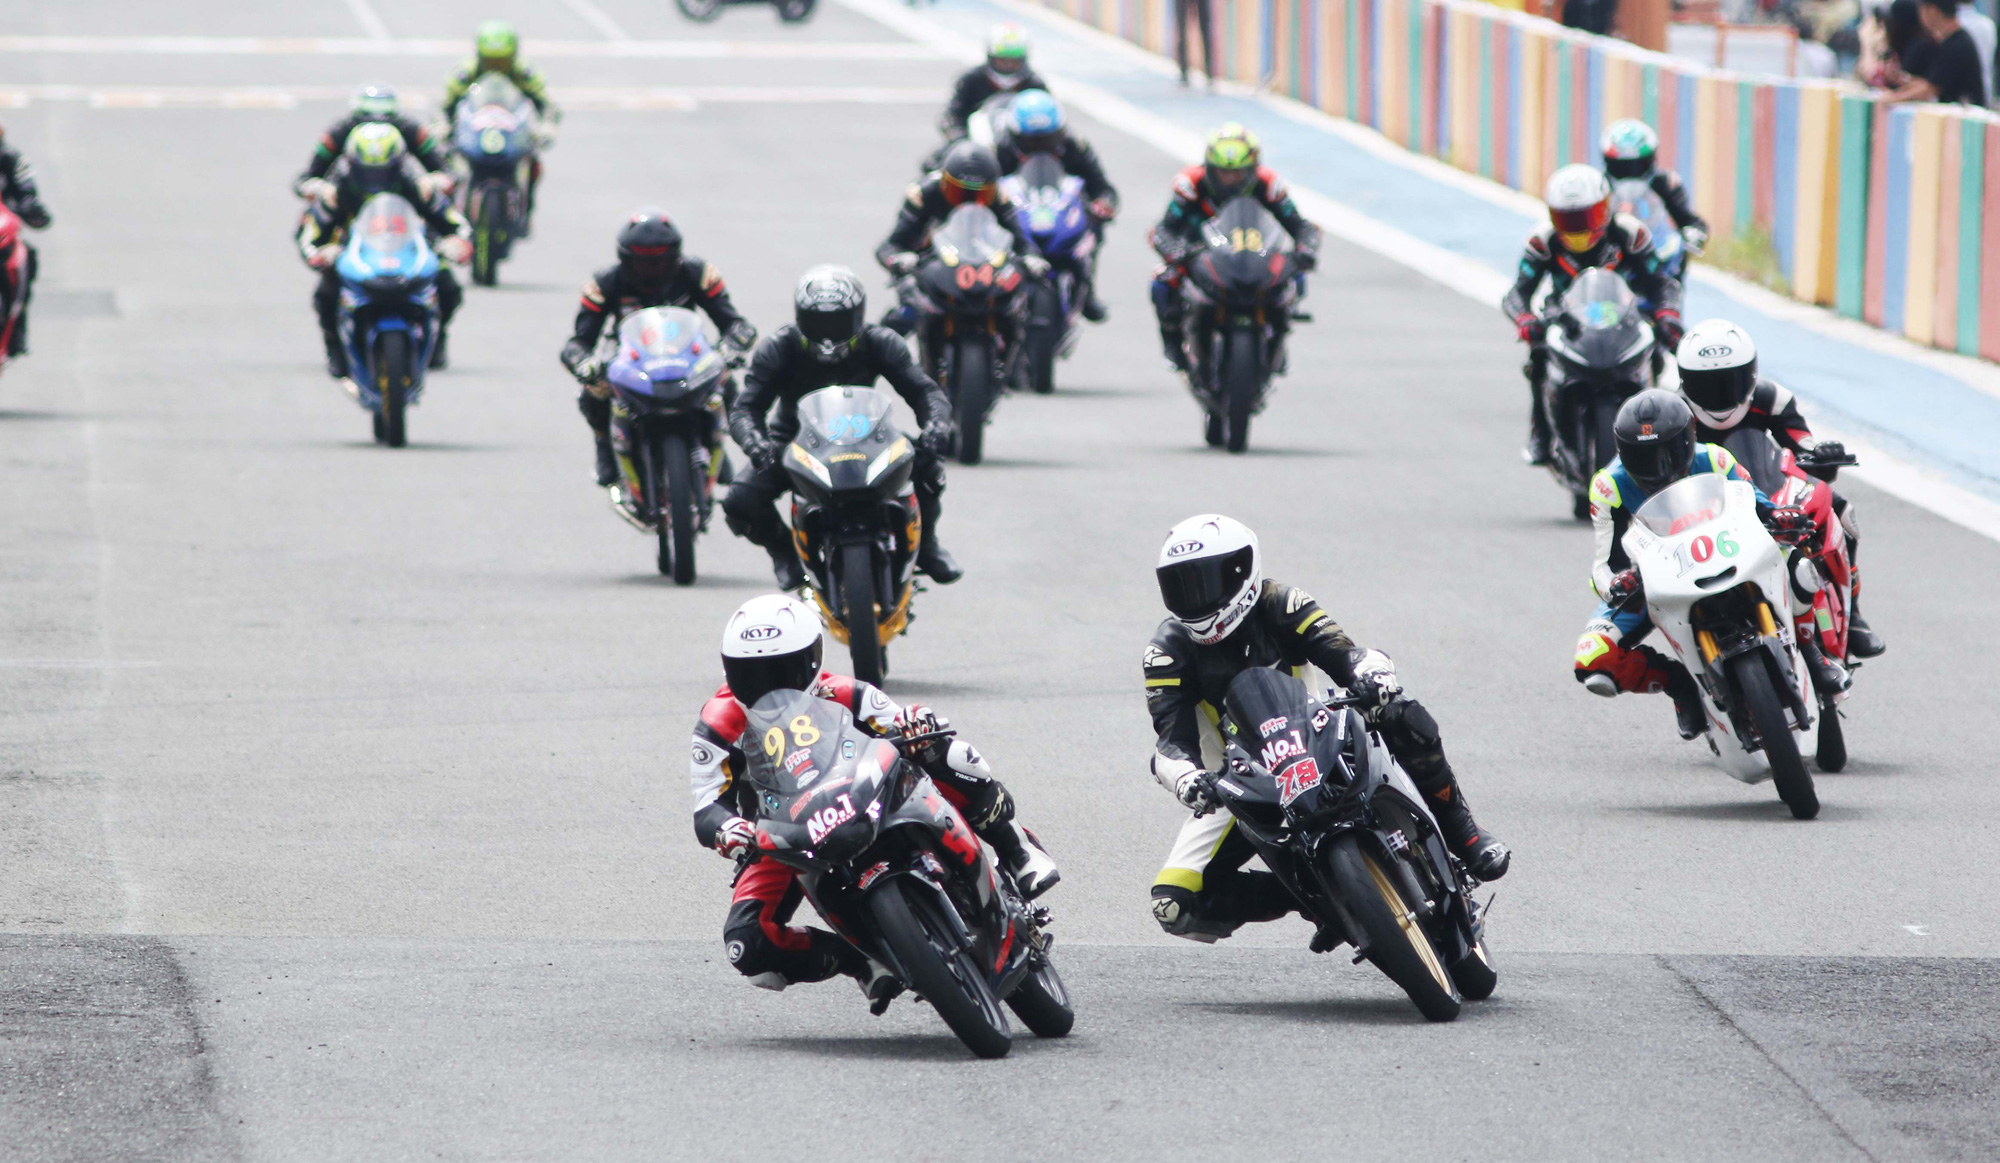 Experimental motorcycle race thrills spectators in southern Vietnam